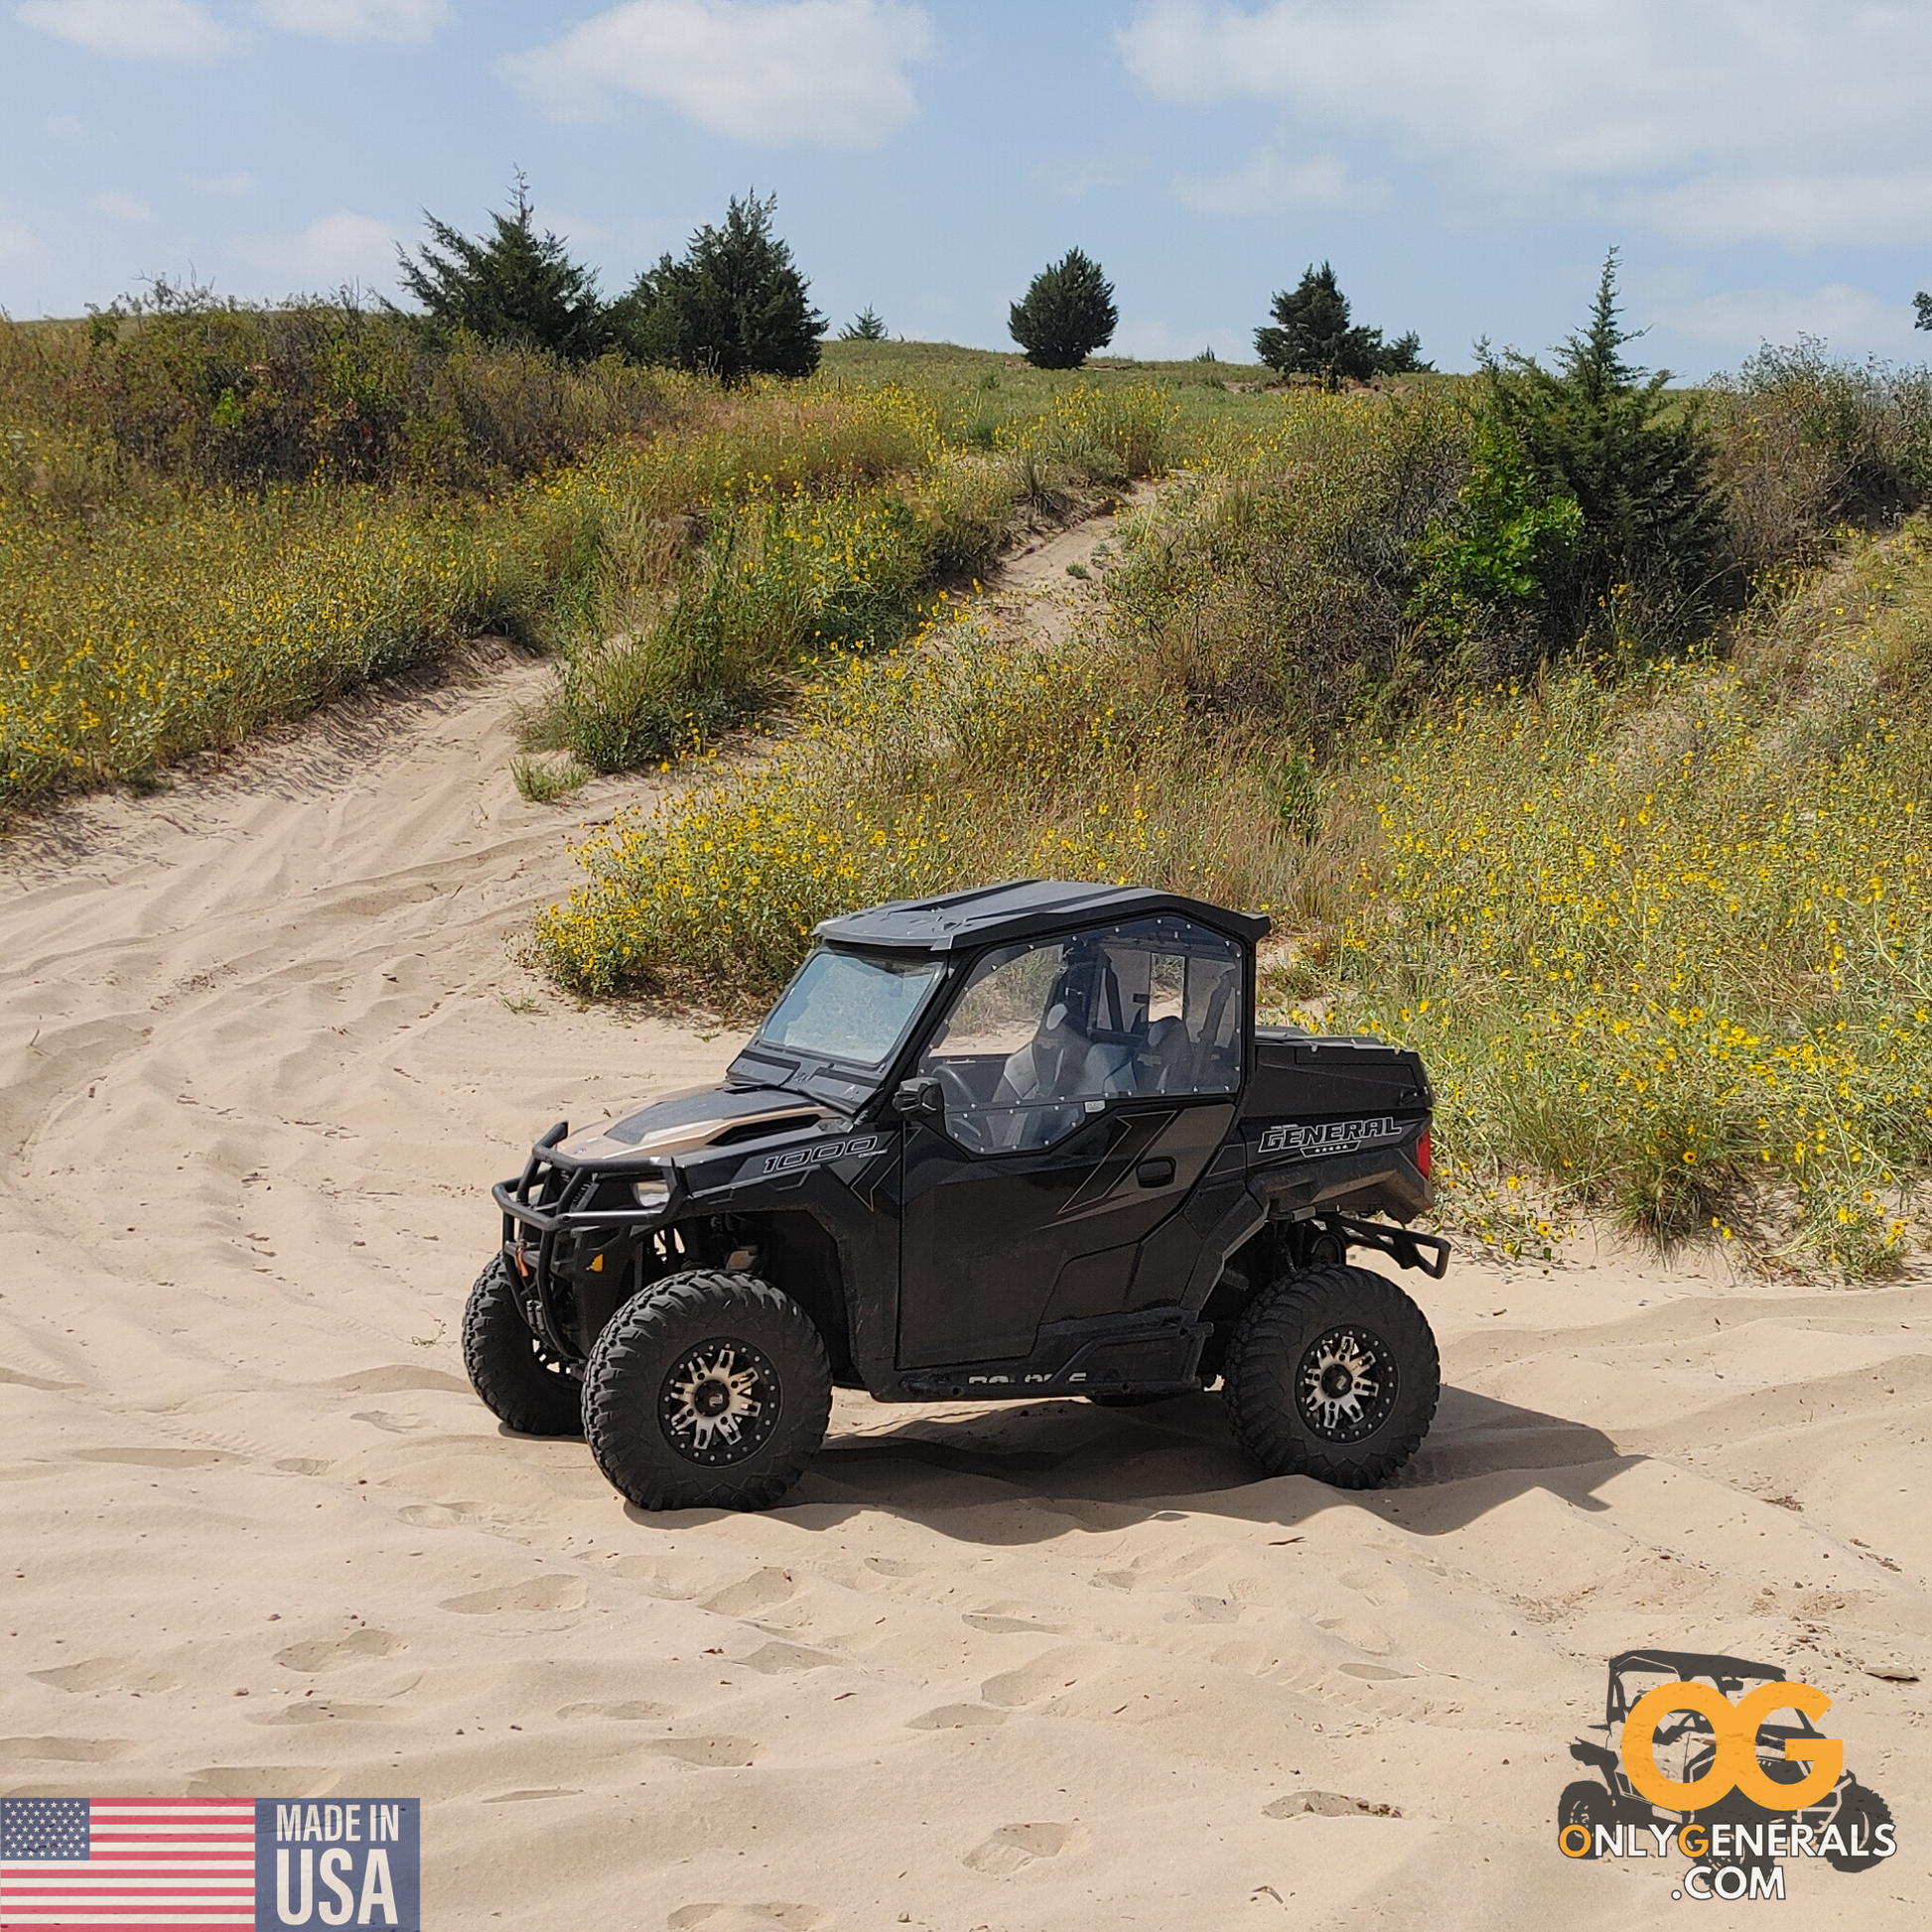 Out in the sand, a Polaris General showcasing the OnlyGenerals SideskinsLITE hard upper doors